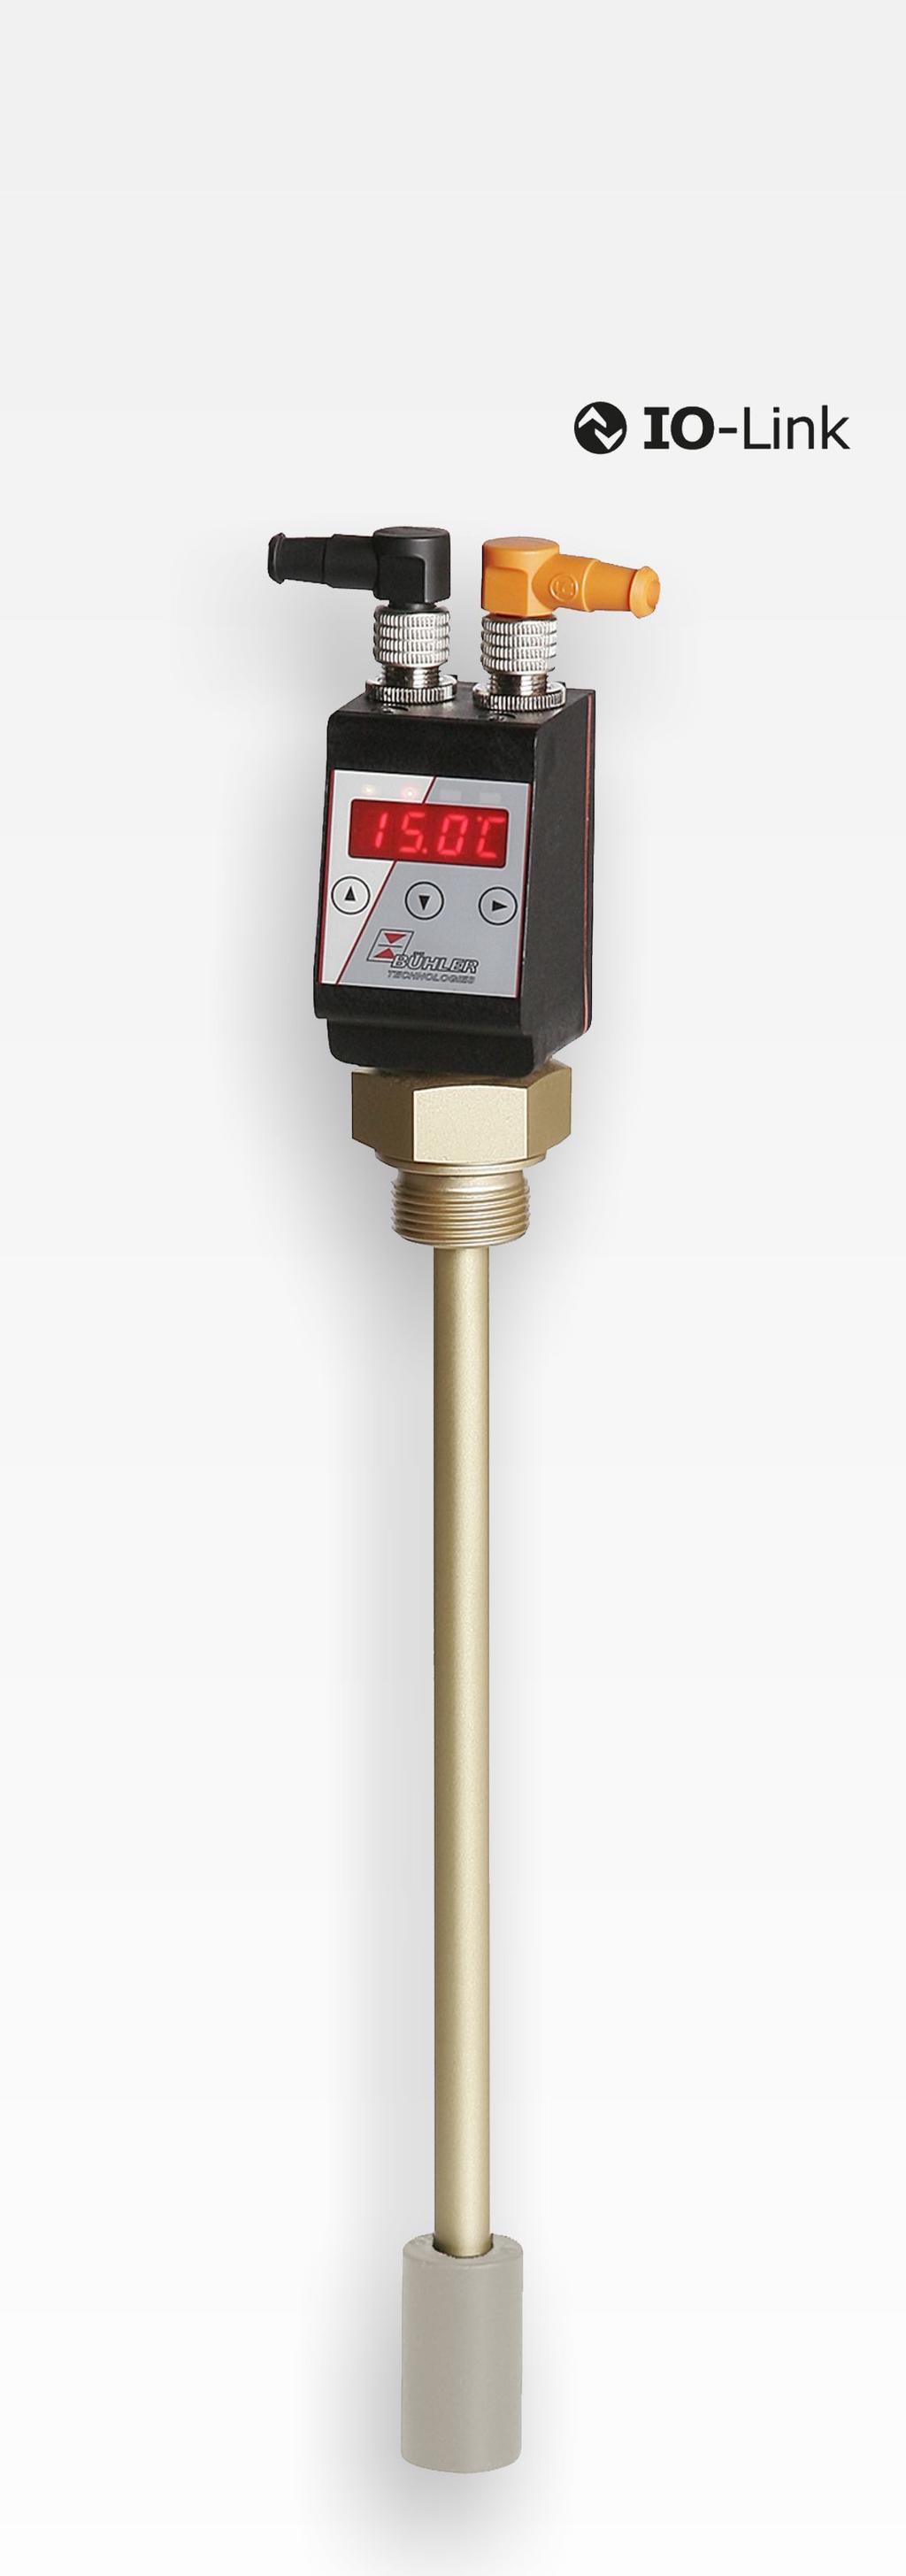 Level- and temperature sensor Nivotemp NT M-XP Fluidcontrol In hydraulics and lubrication technology the fill level of oil tanks needs to be monitored continuously.